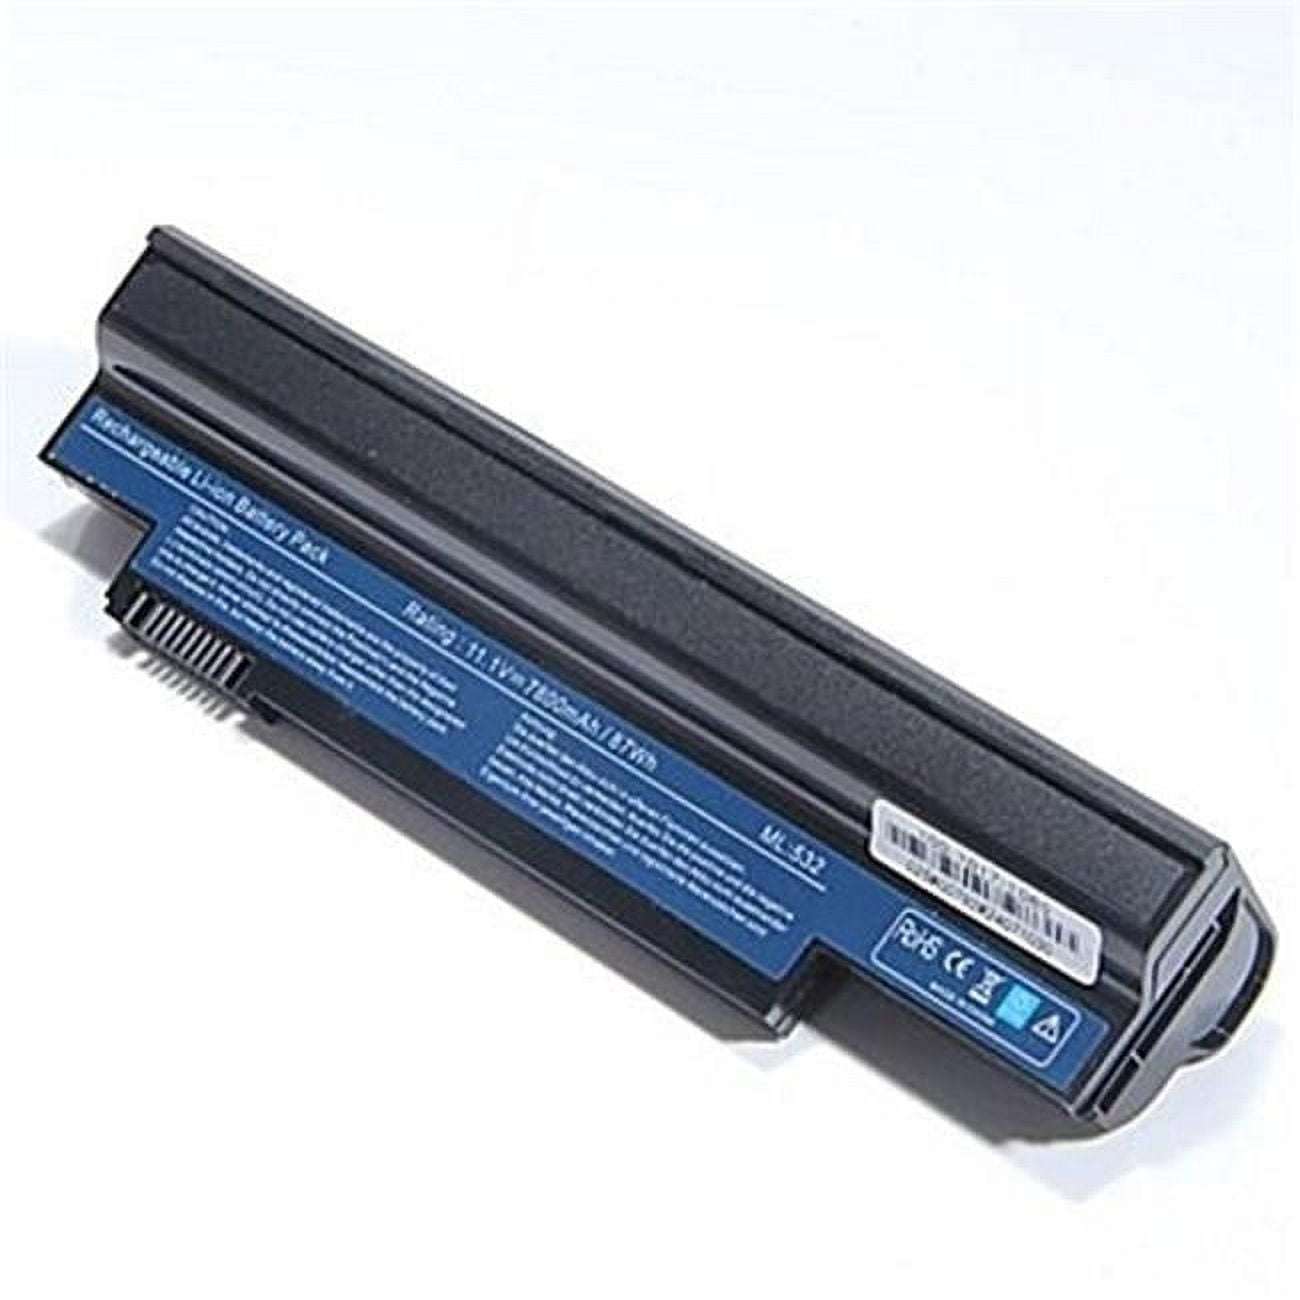 Picture of Dantona NM-UM09G31 Replacement Laptop Battery for Acer Aspire 533